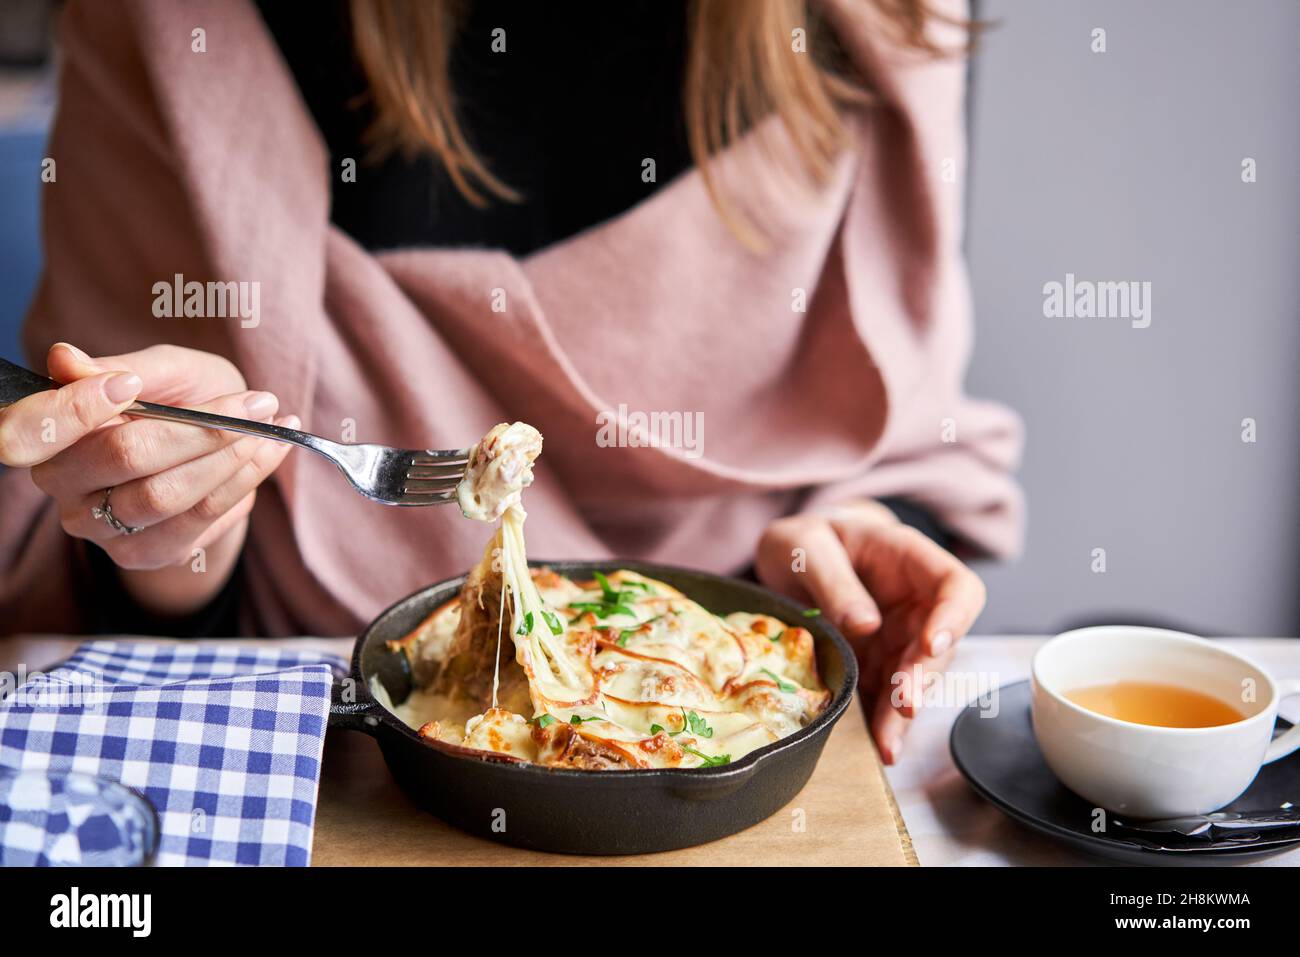 Potato with cheese casserole in a cast-iron frying pan. Close-up of a woman eating with a fork. Latvian cuisine. Stock Photo